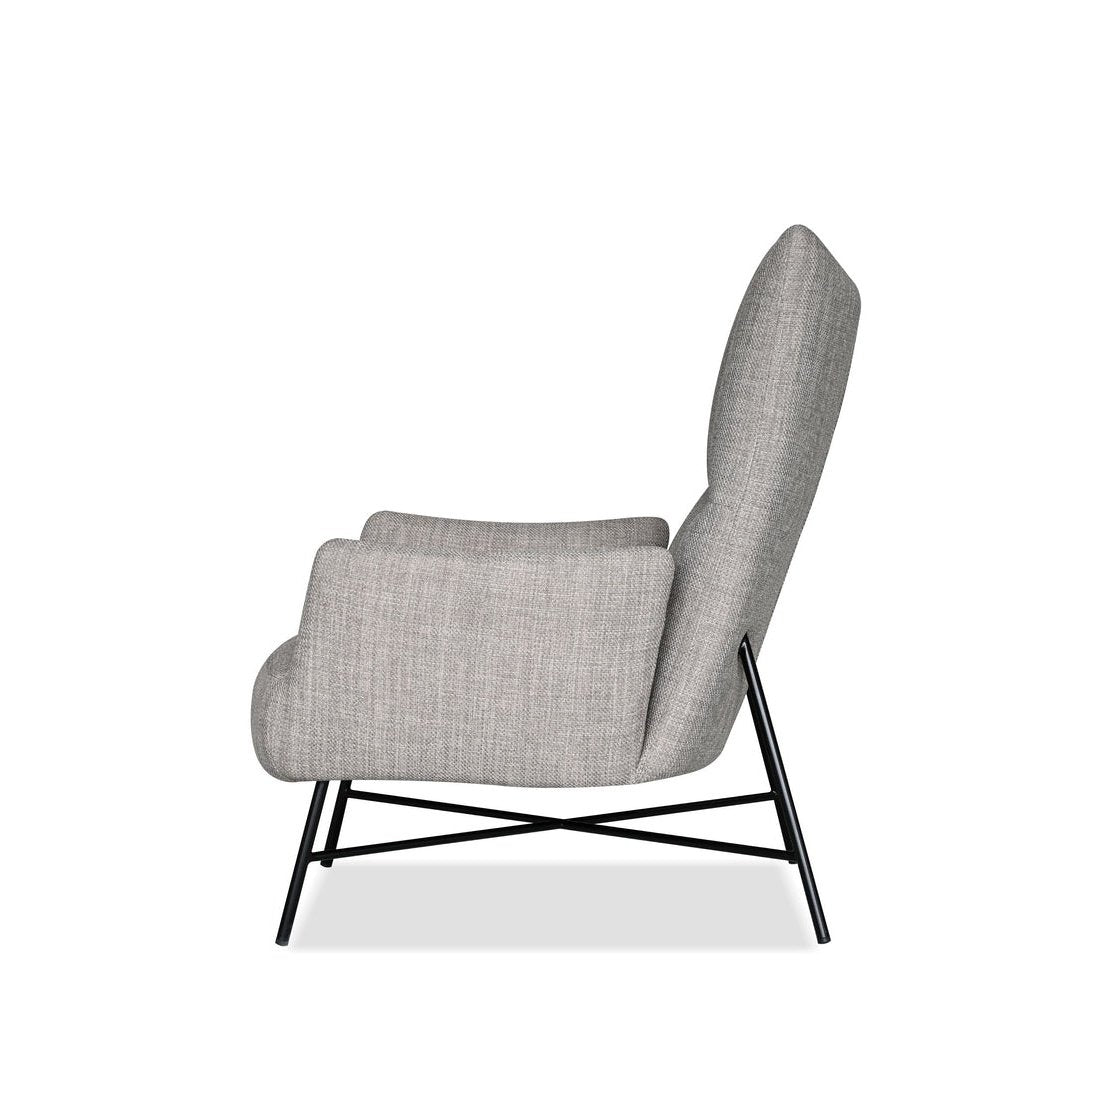 CARAWAY CHAIR